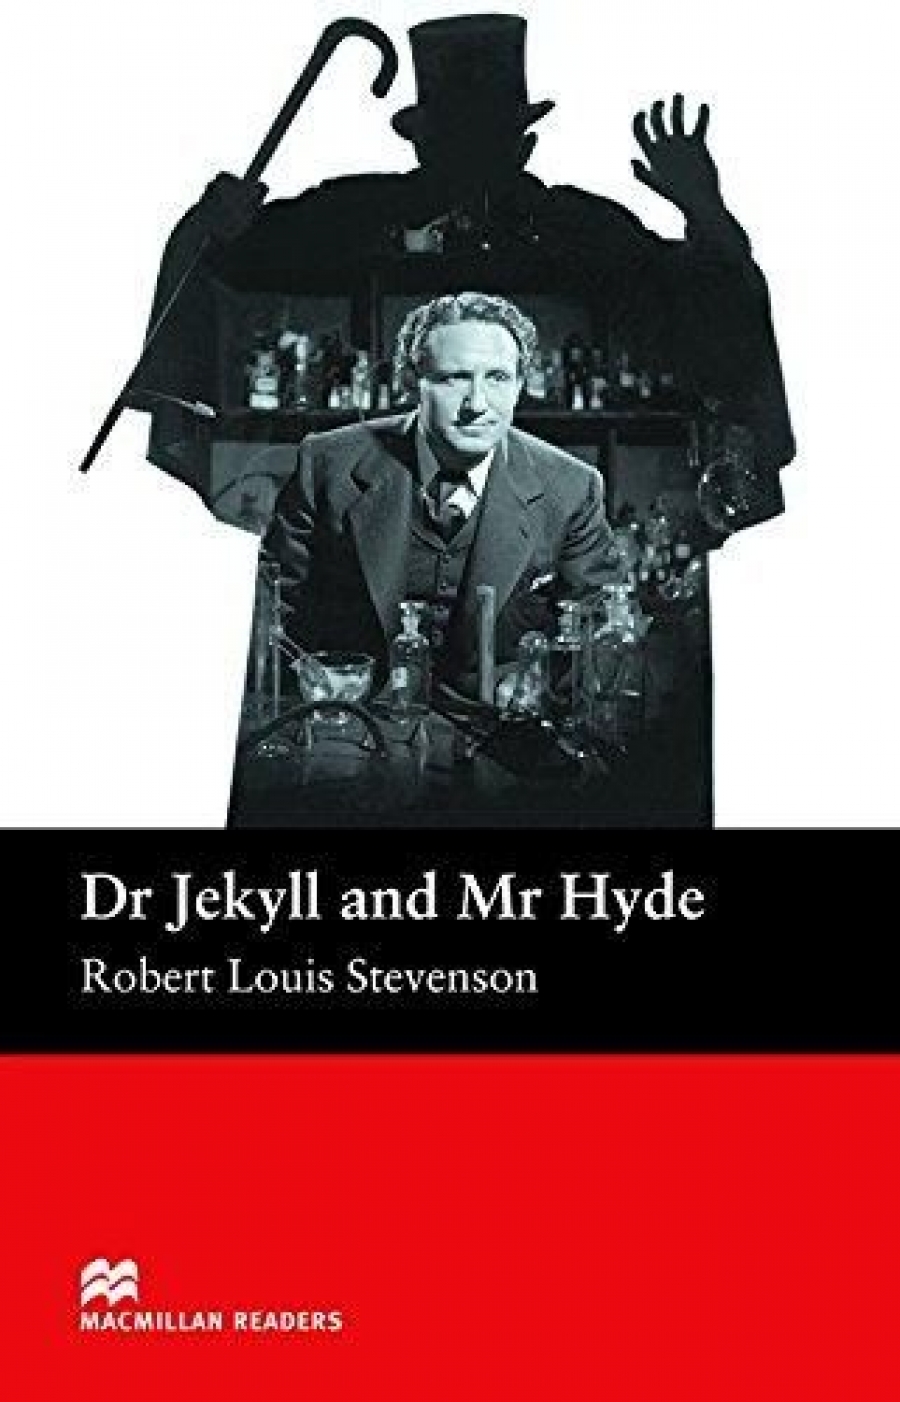 Robert Louis Stevenson, retold by Stephen Colbourn Dr Jekyll and Mr Hyde 